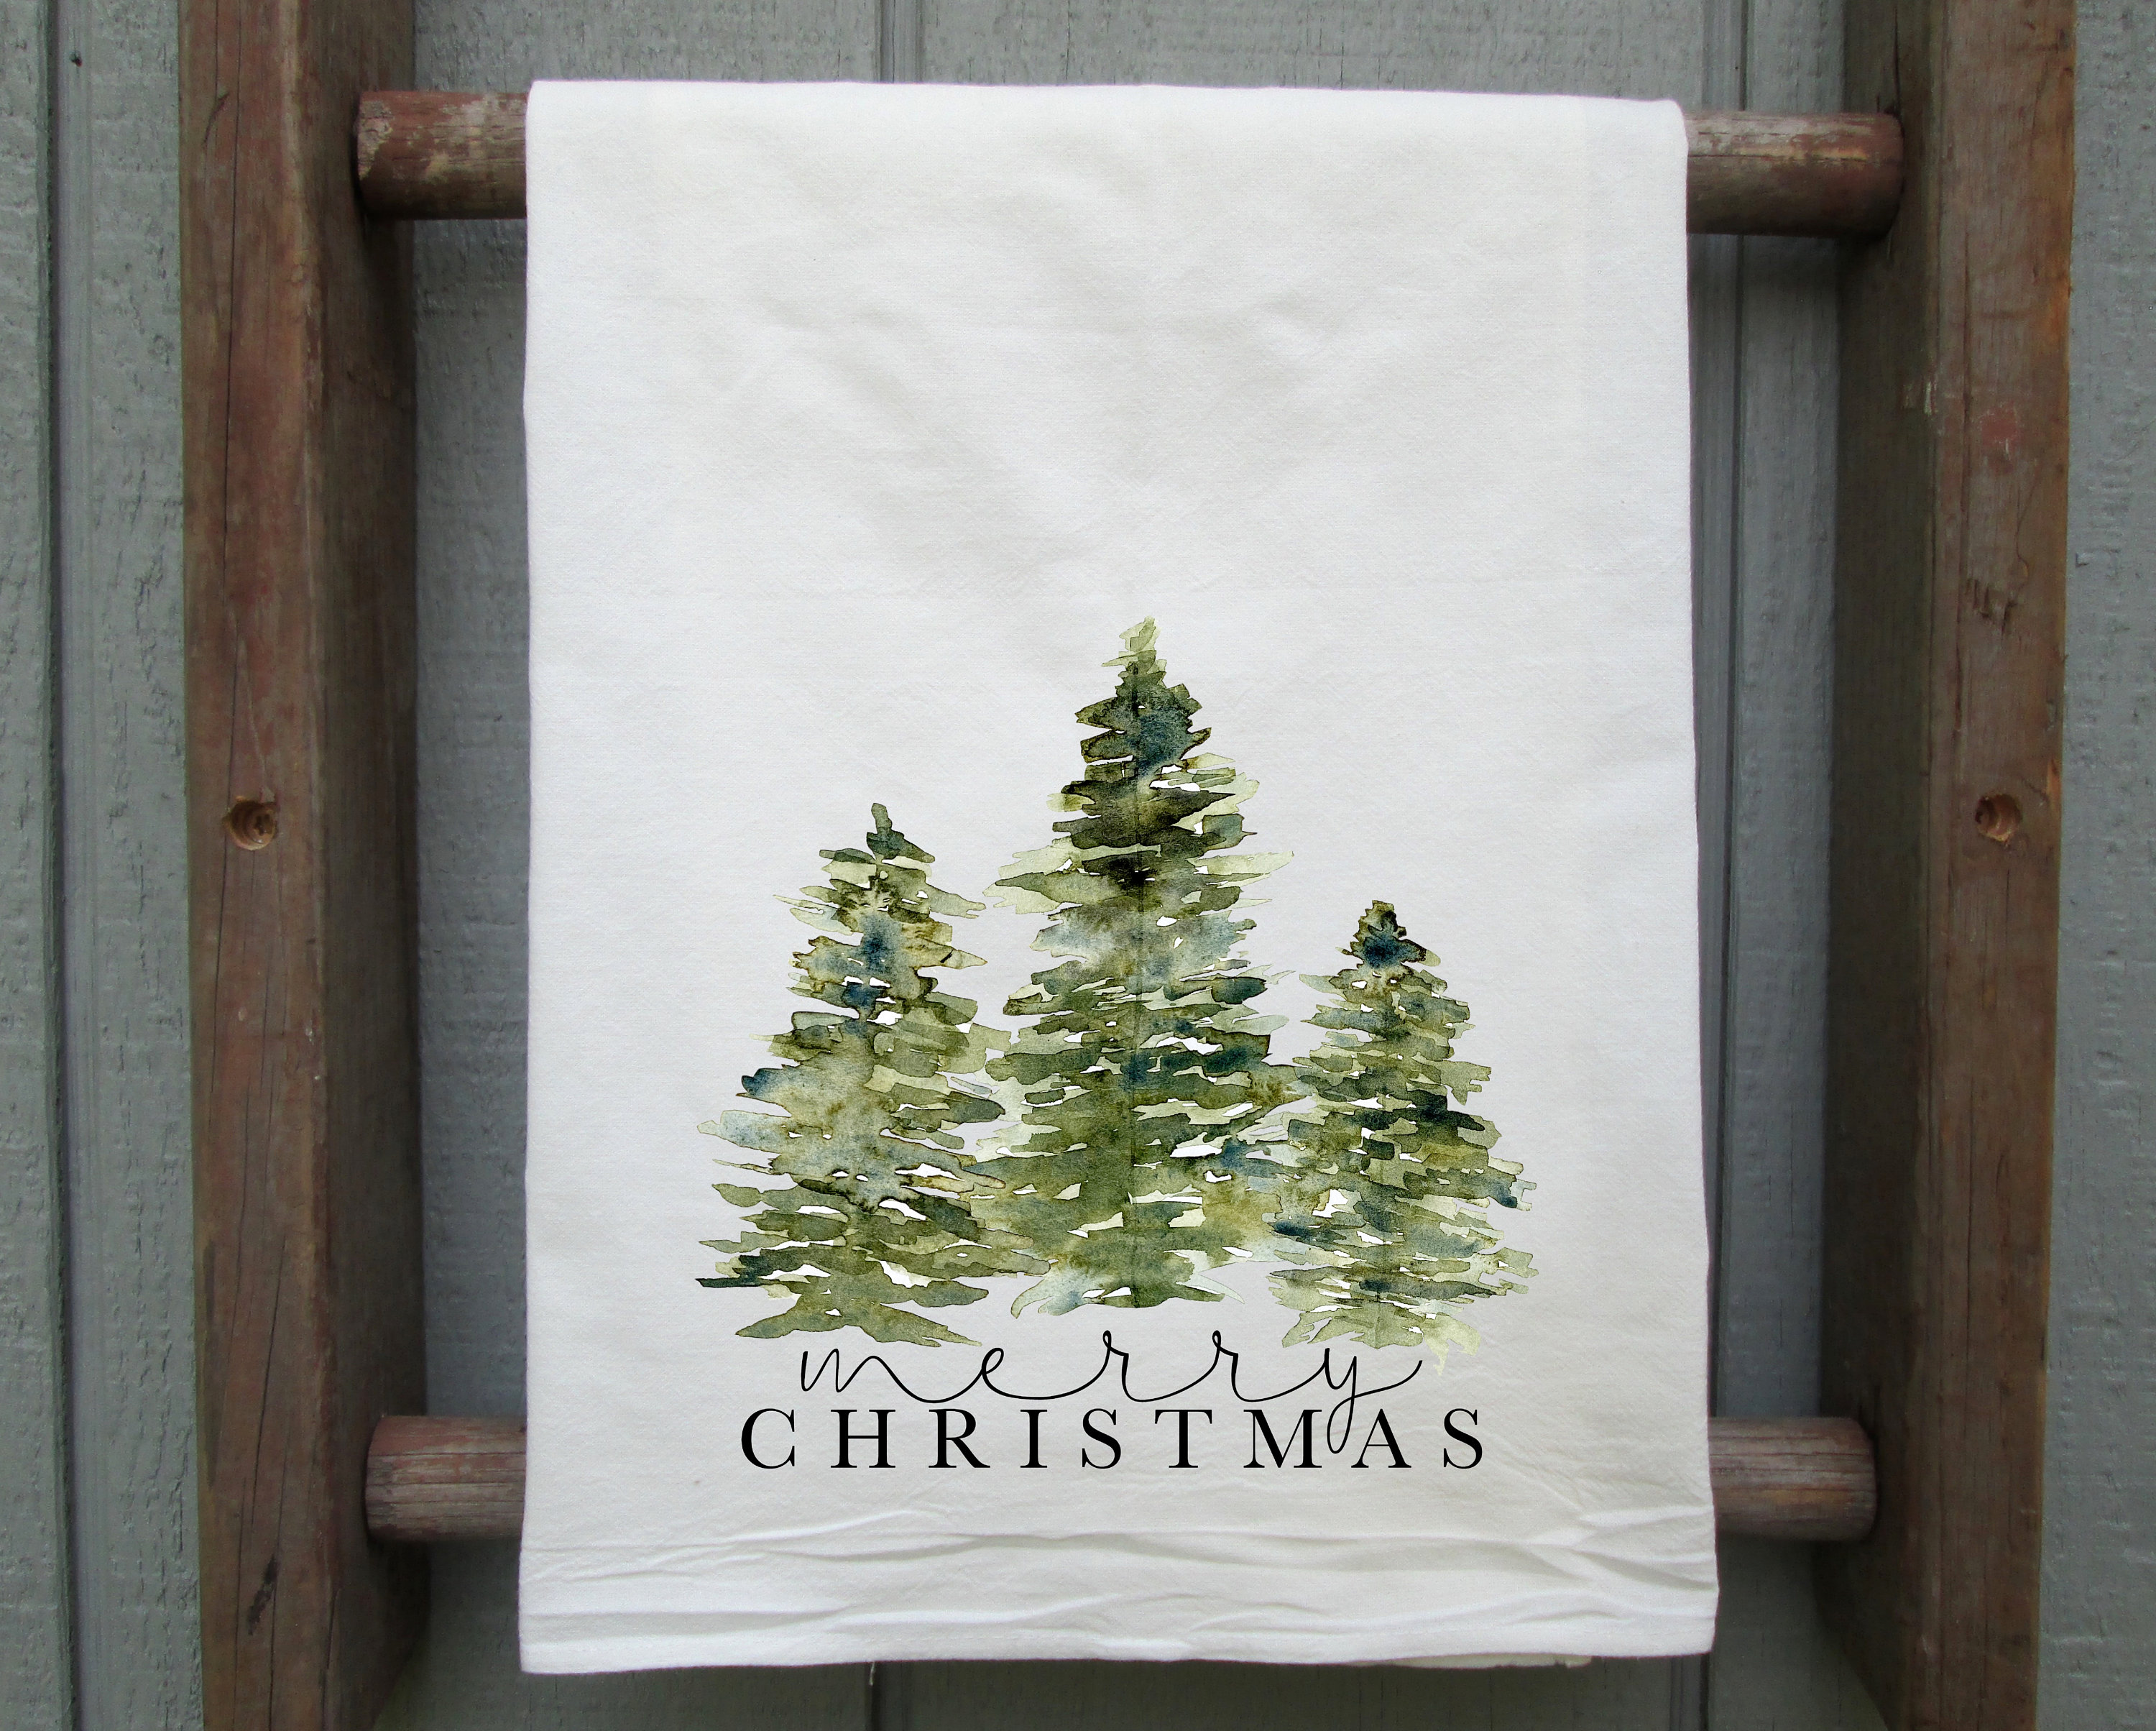 Black and white Christmas trees pattern Hand & Bath Towel by Muxune